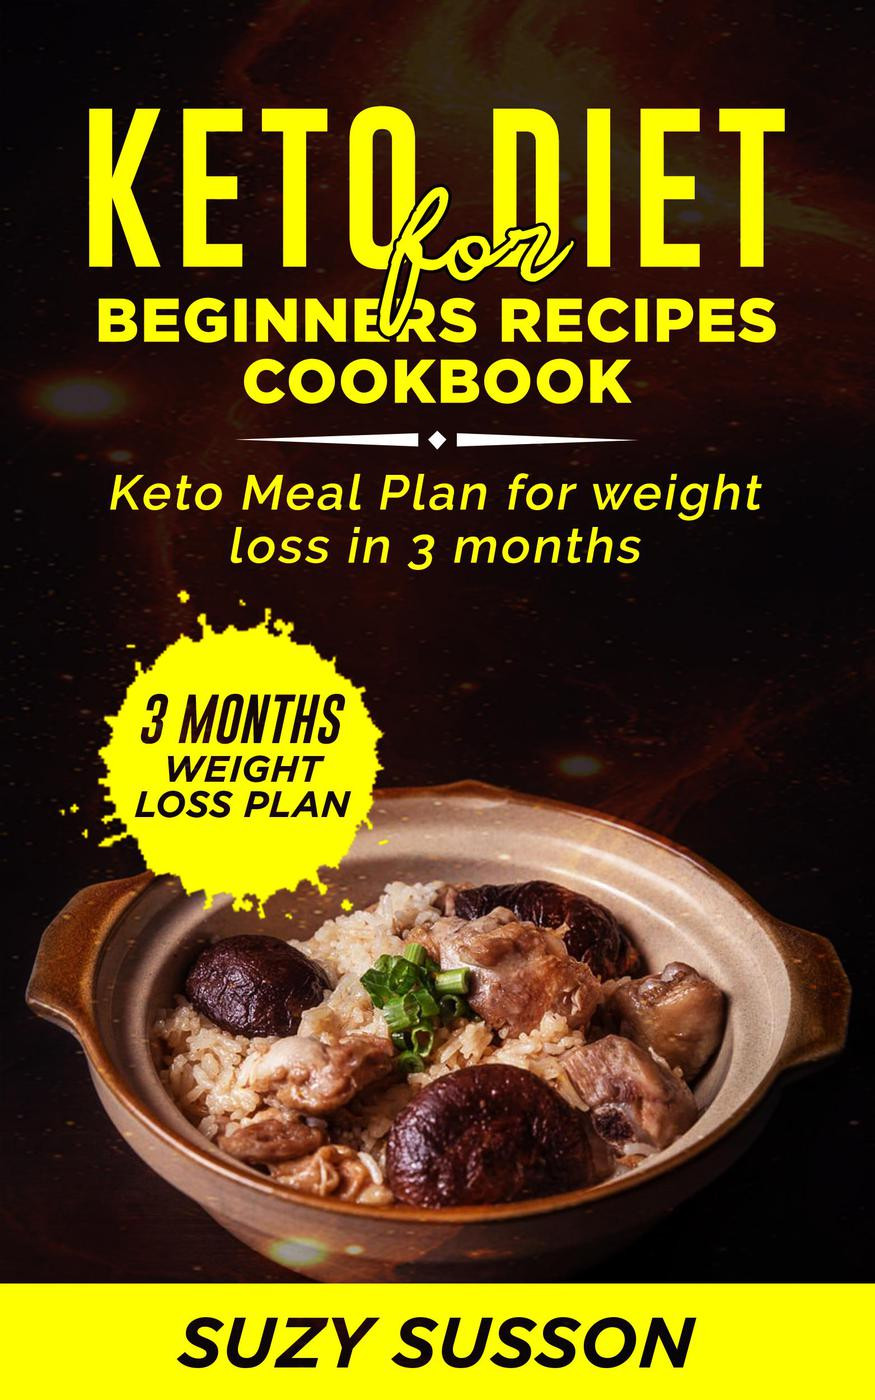 Keto Diet For Beginners Losing Weight Recipes
 Download Keto Diet for Beginners Recipes Cookbook Keto